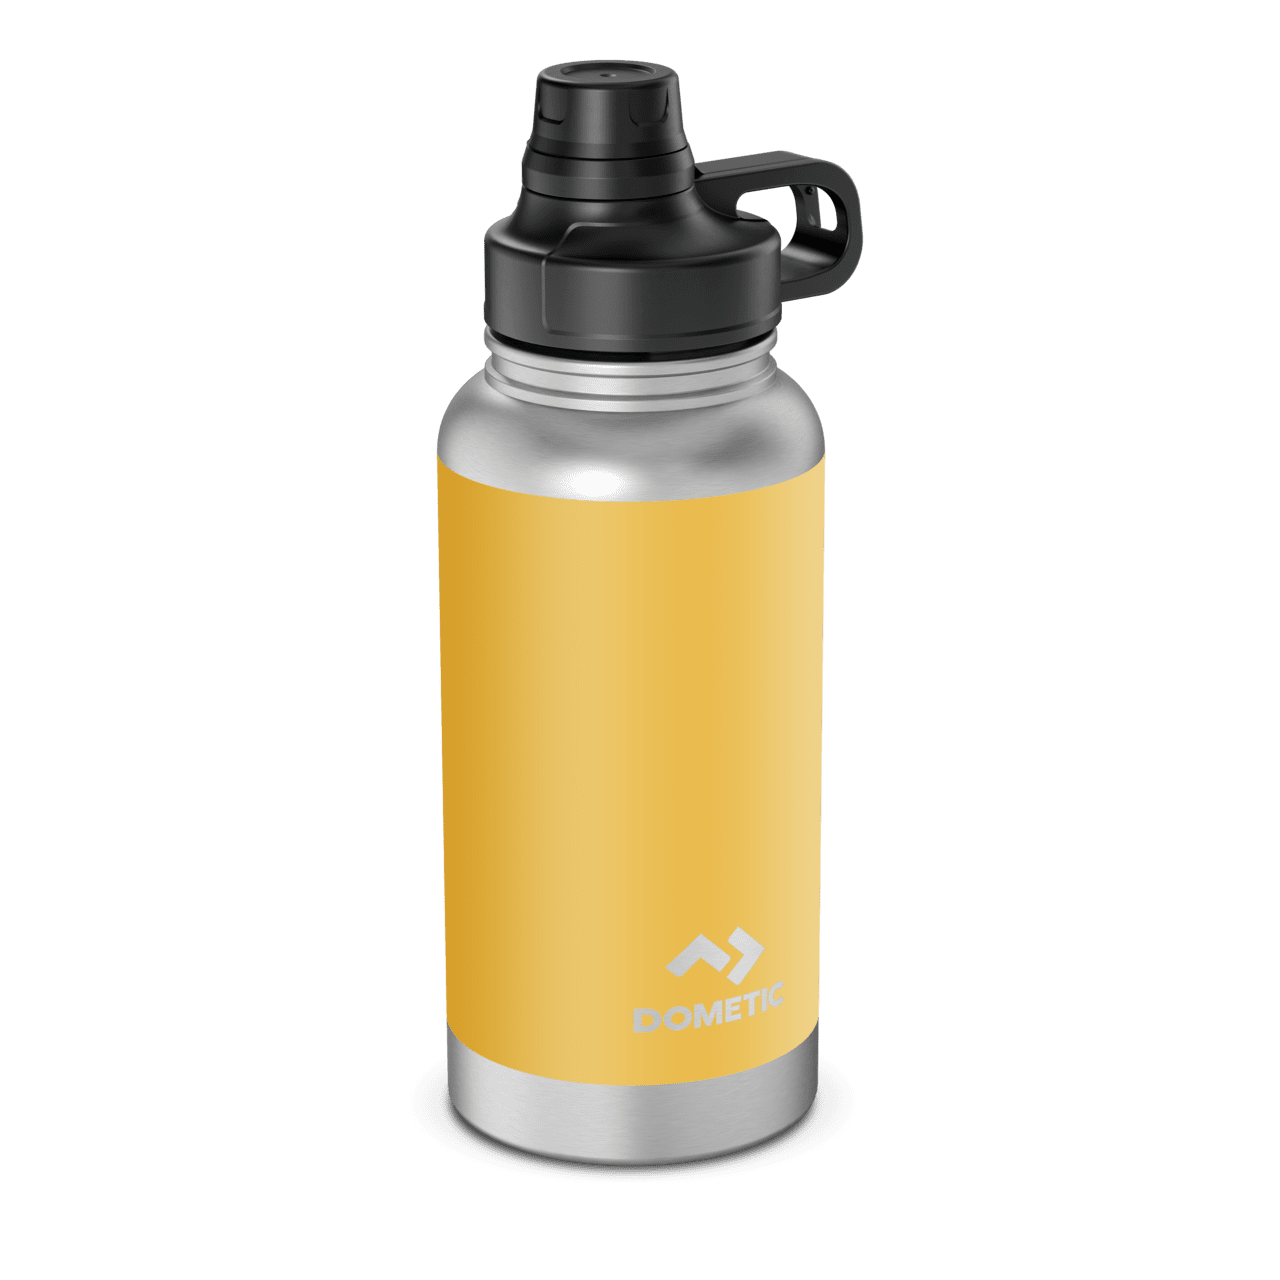 Dometic - Dometic Thermo Bottle 90 - Glow